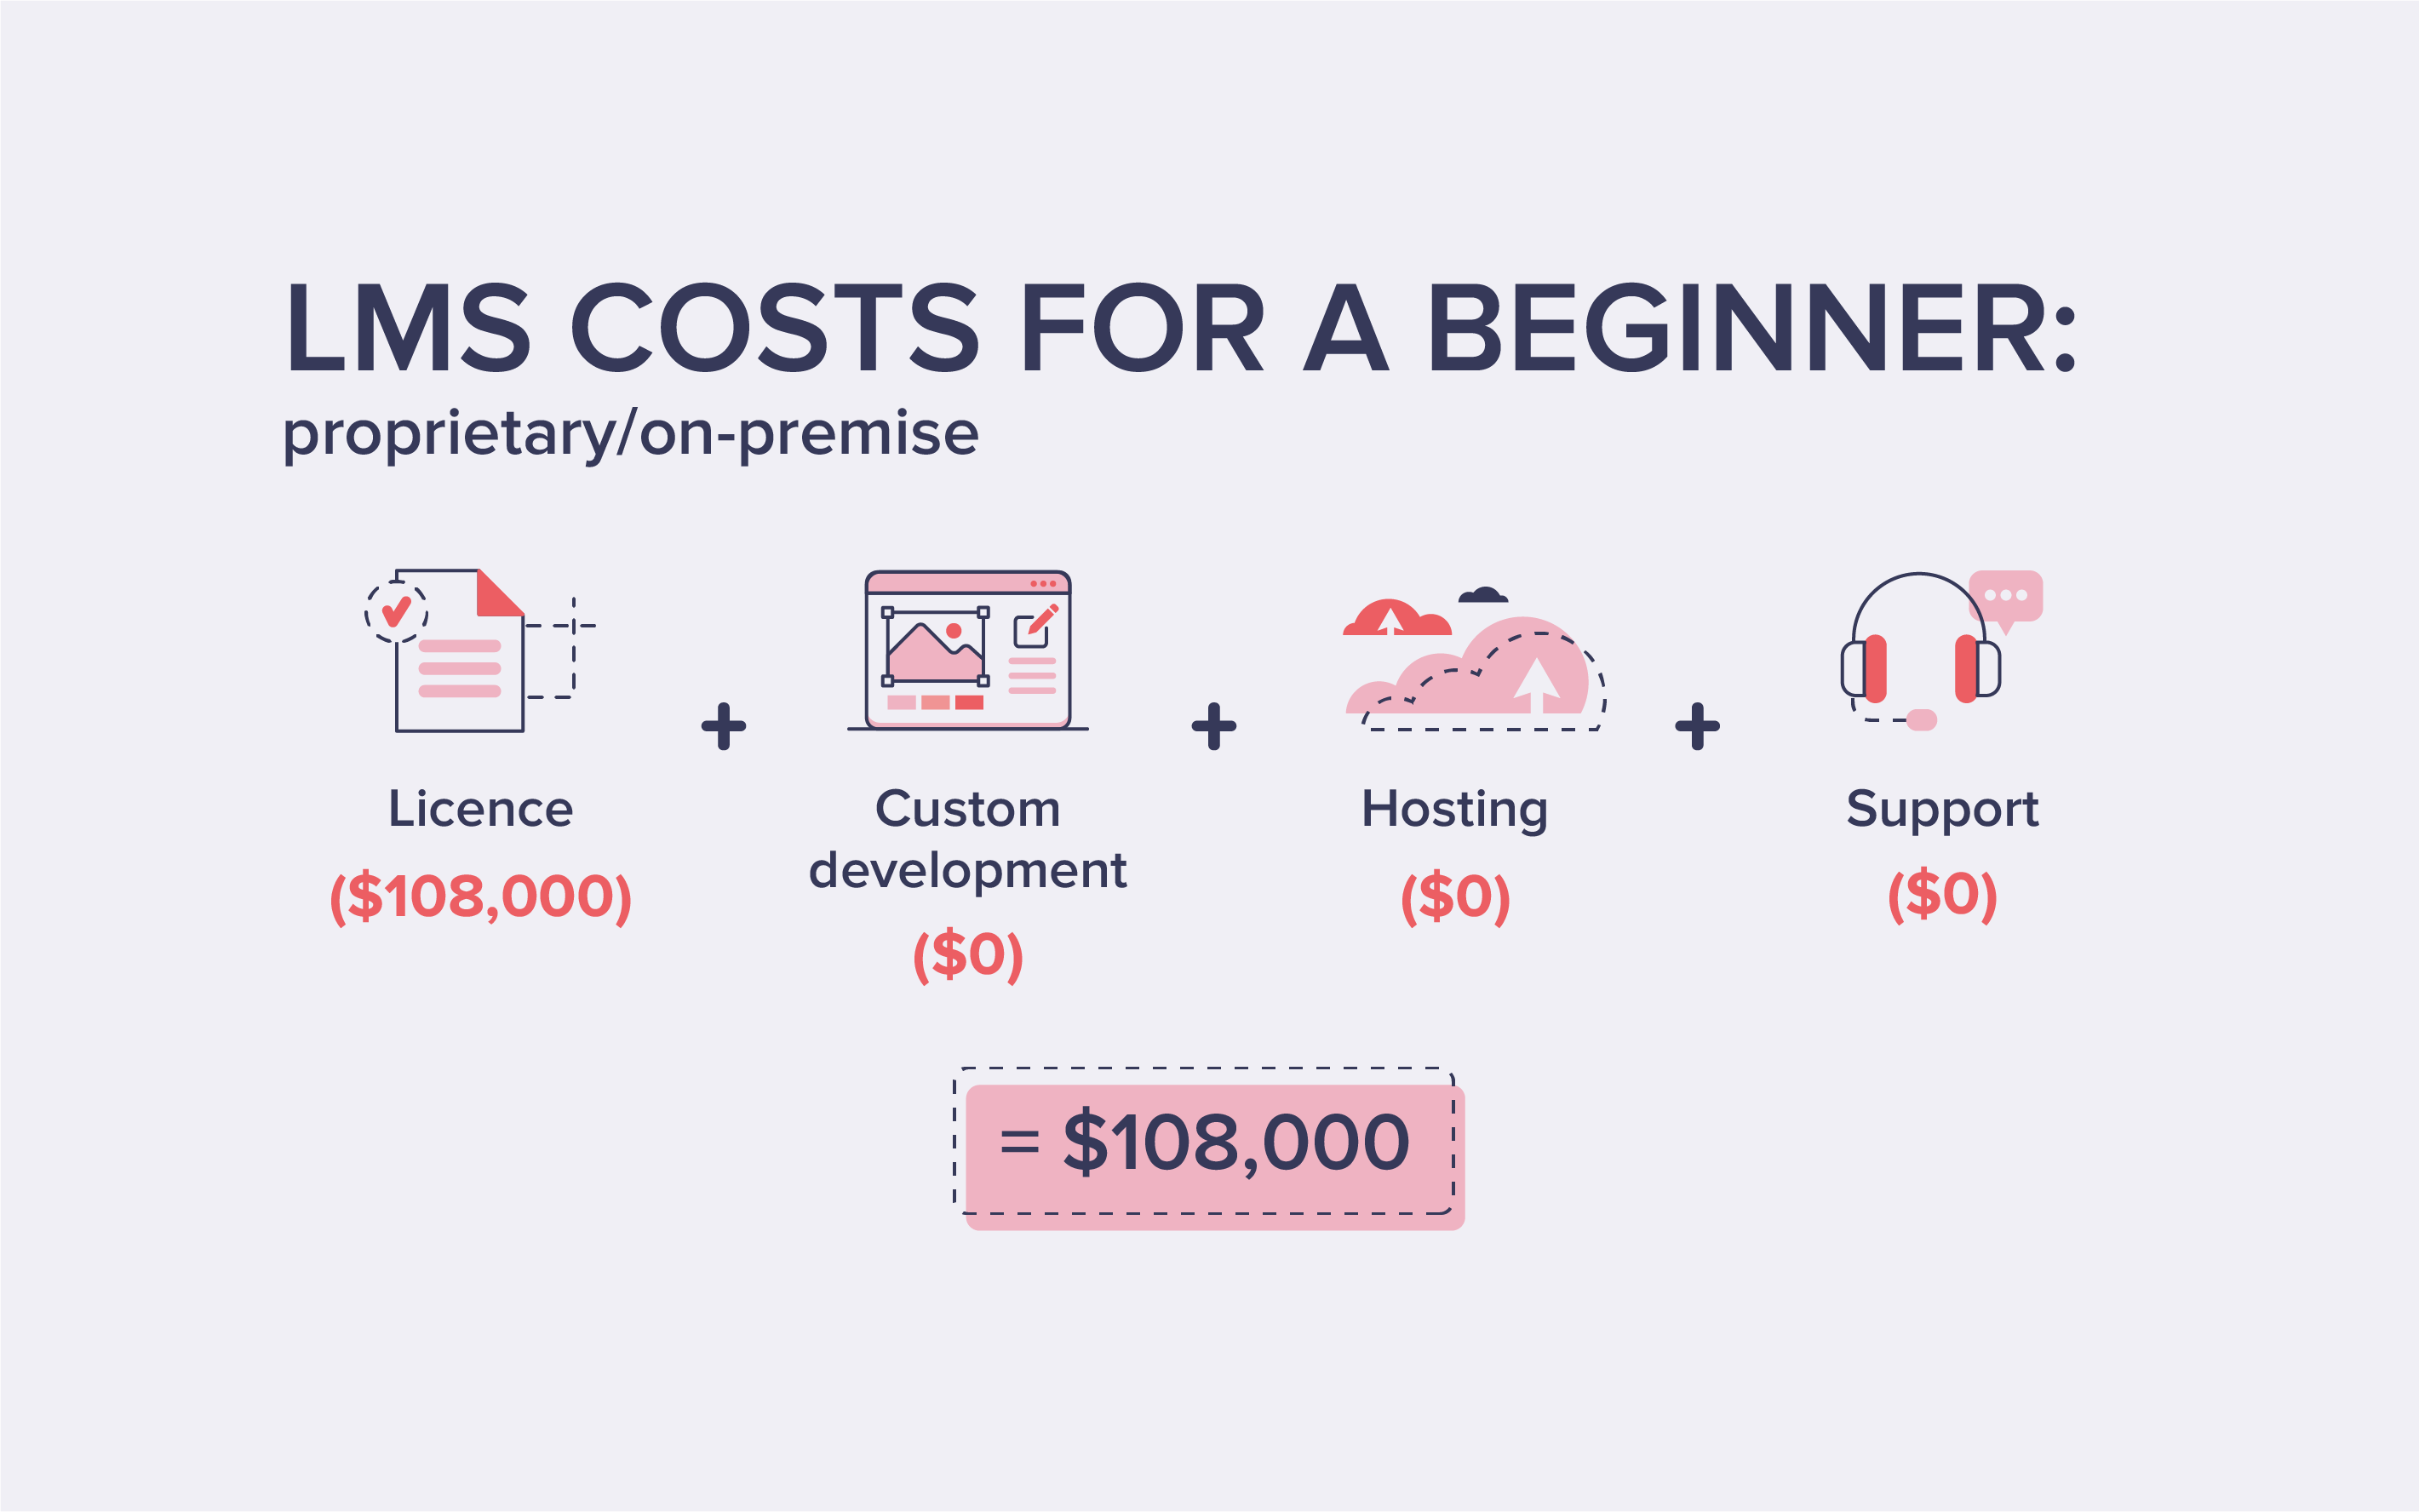 LMS costs for a Beginner: proprietary/on-premise